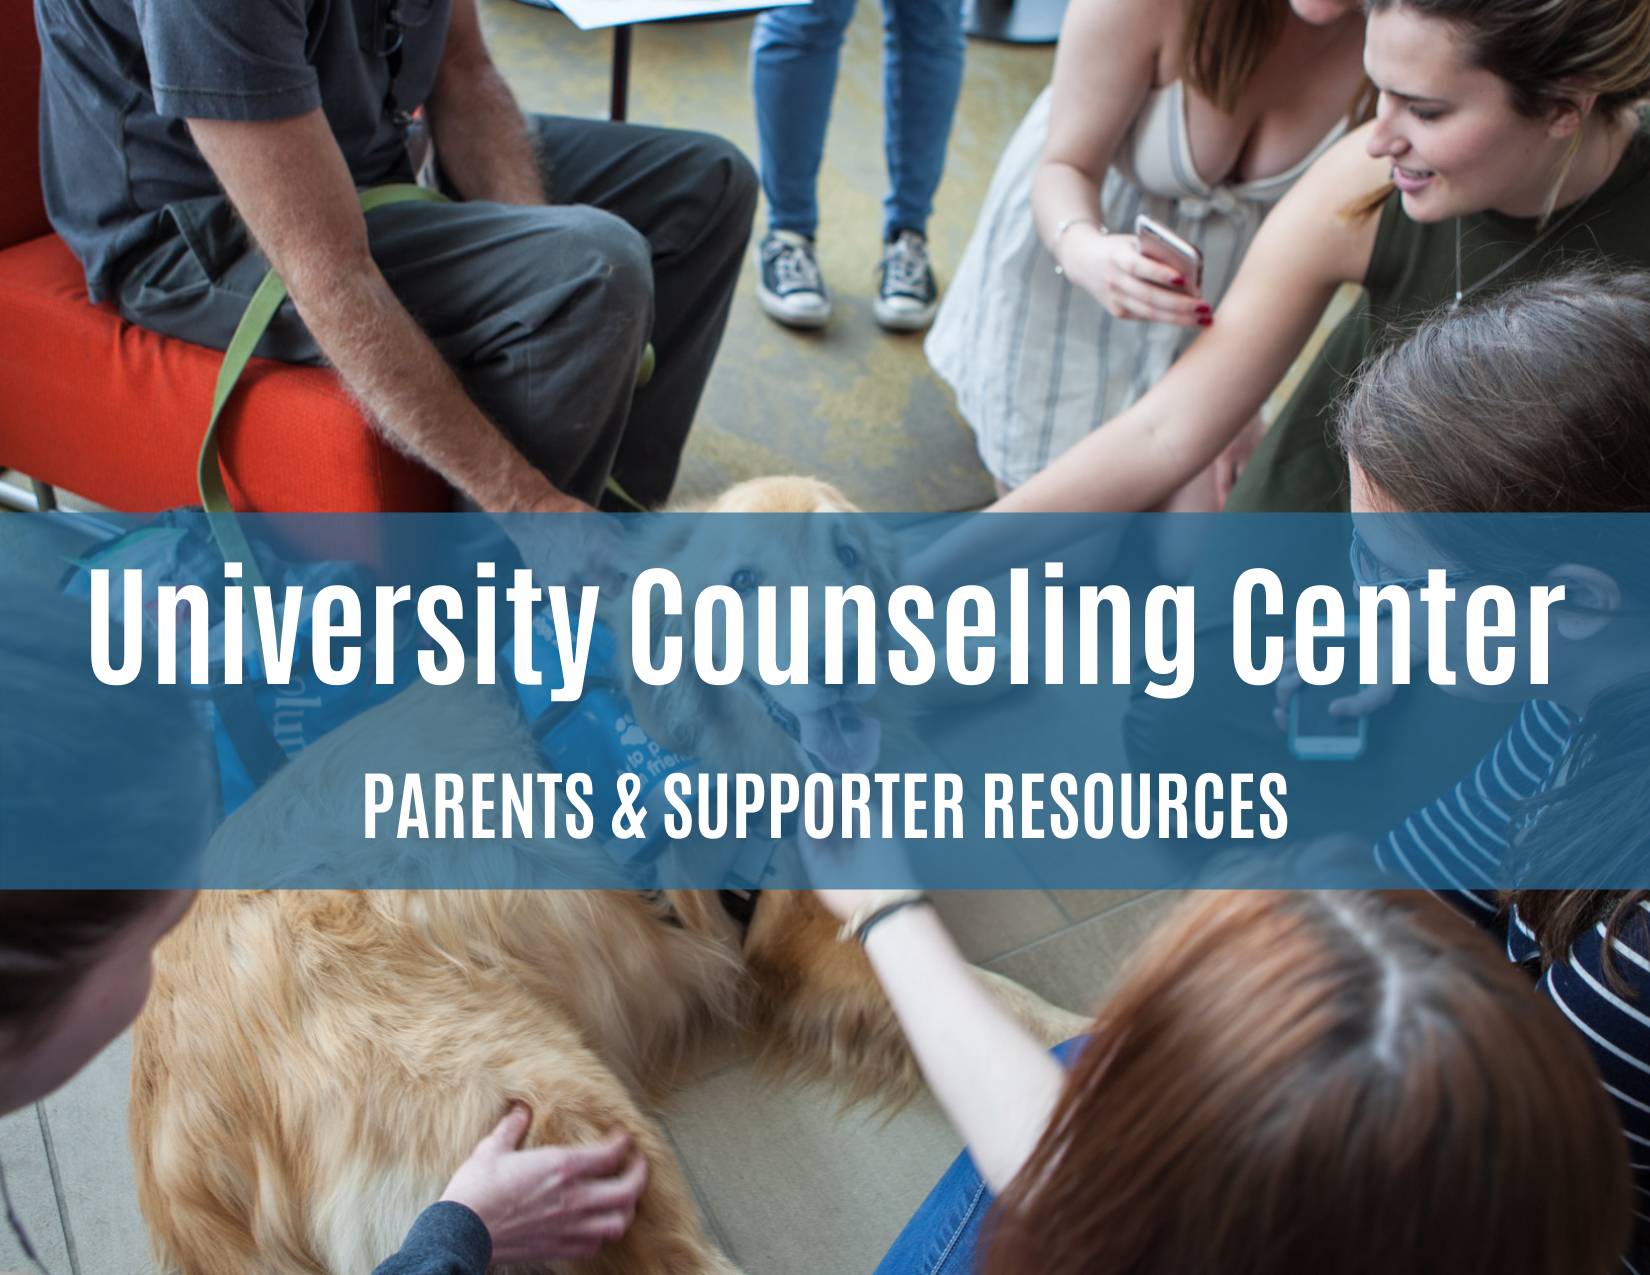 University Counseling Center; parents and supporter resources